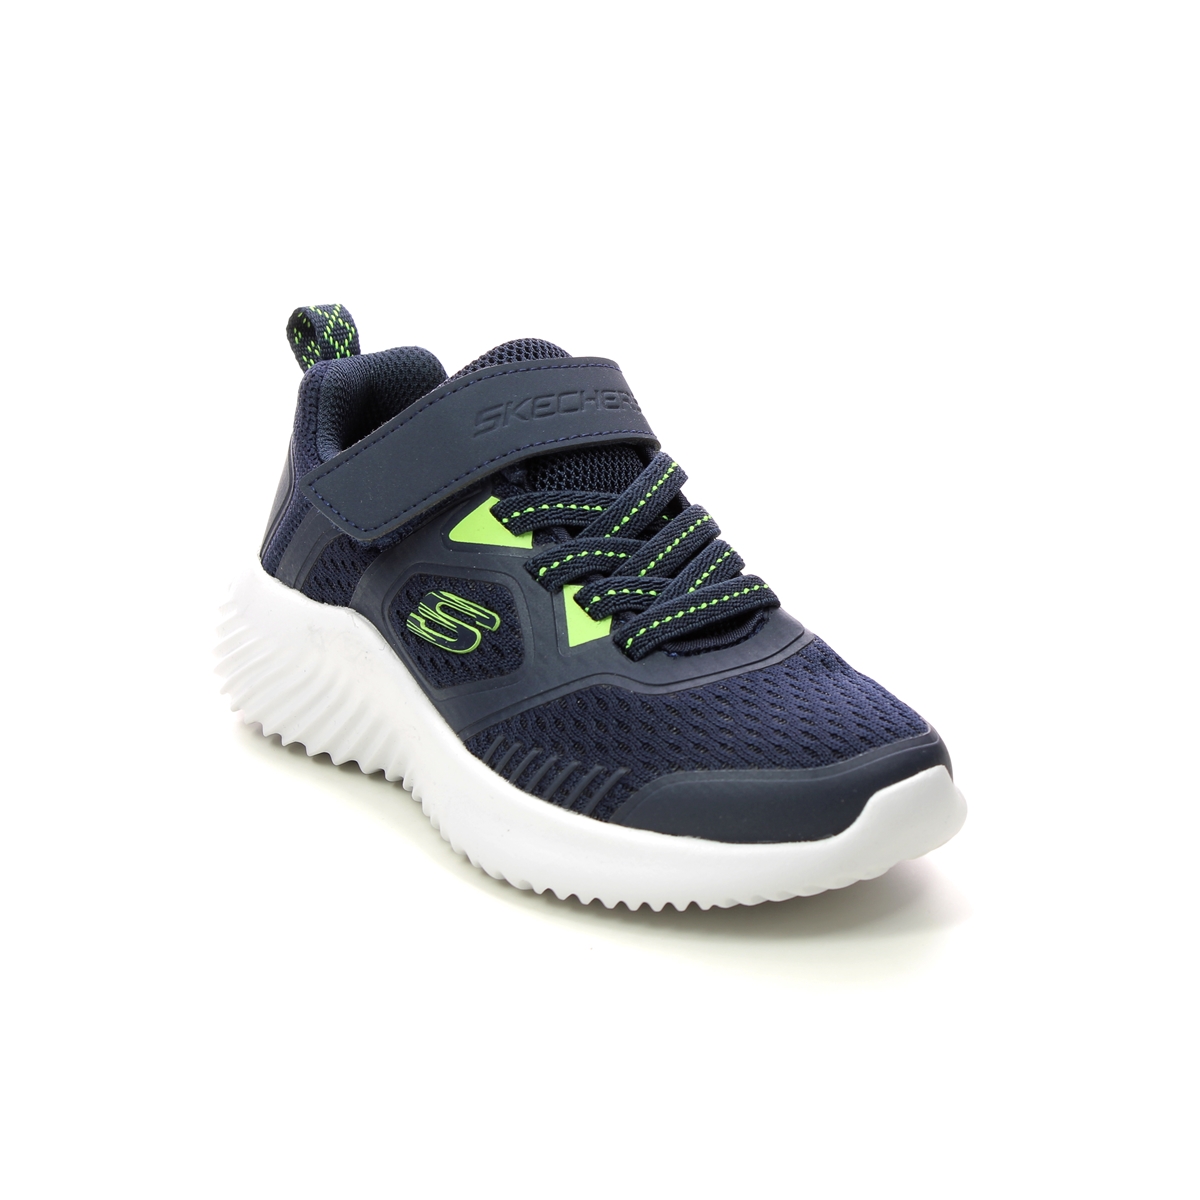 Skechers Bounder Navy Lime Kids Trainers 403736L In Size 31 In Plain Navy Lime For kids